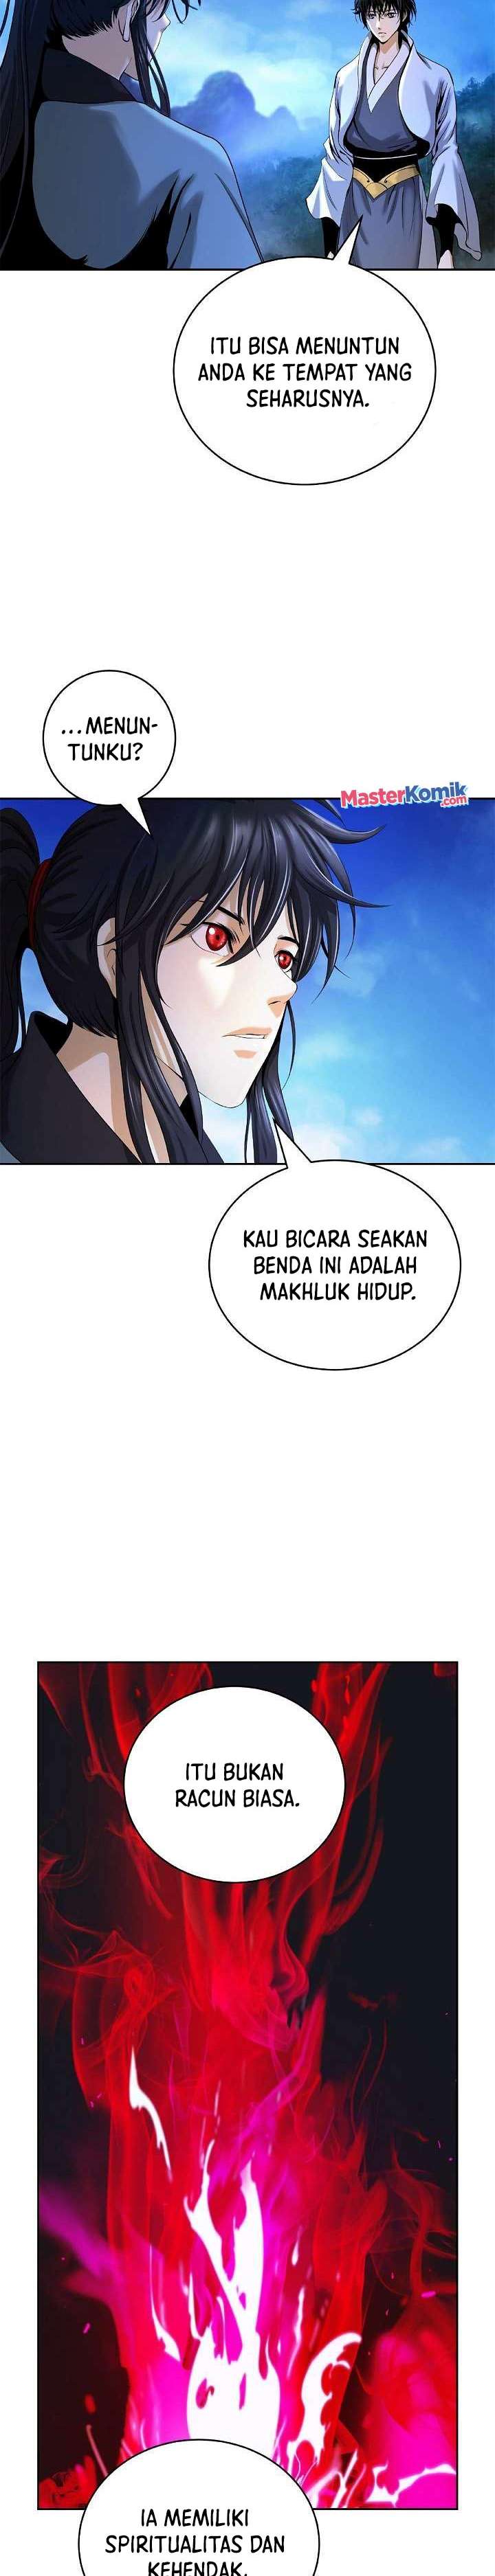 Cystic Story Chapter 86